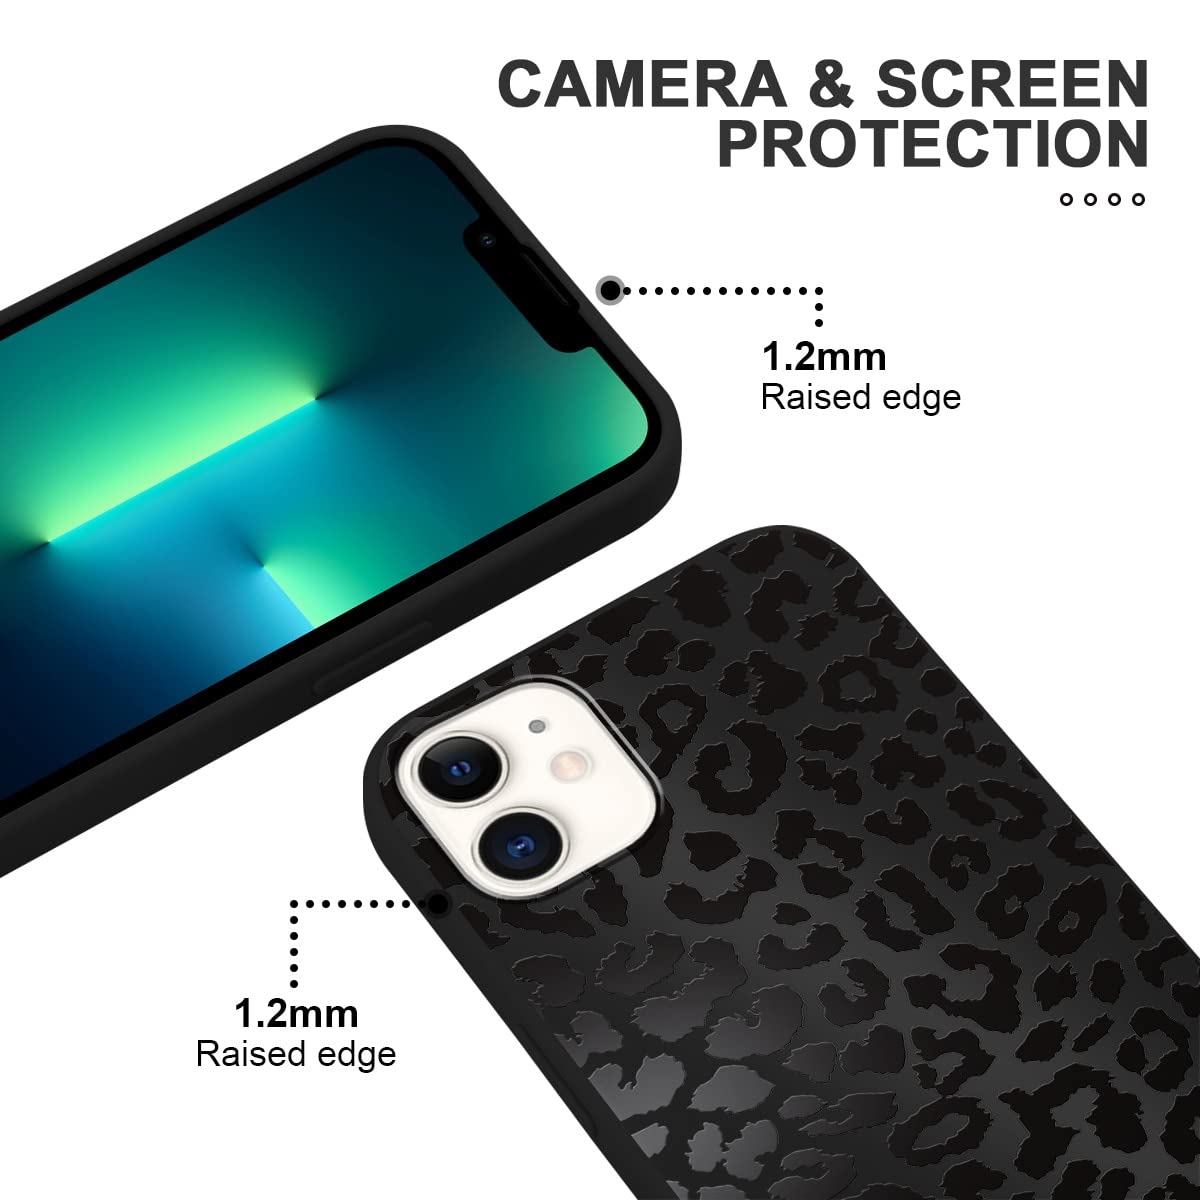 RUMDEY 2 Pack Cute Cheetah Print for Apple iPhone 11 6.1 Inch Phone Case,Luxury Leopard Pattern Design Cases Soft Silicone Slim TPU Shockproof Protective Bumper Cover for Women Girls-Black & White